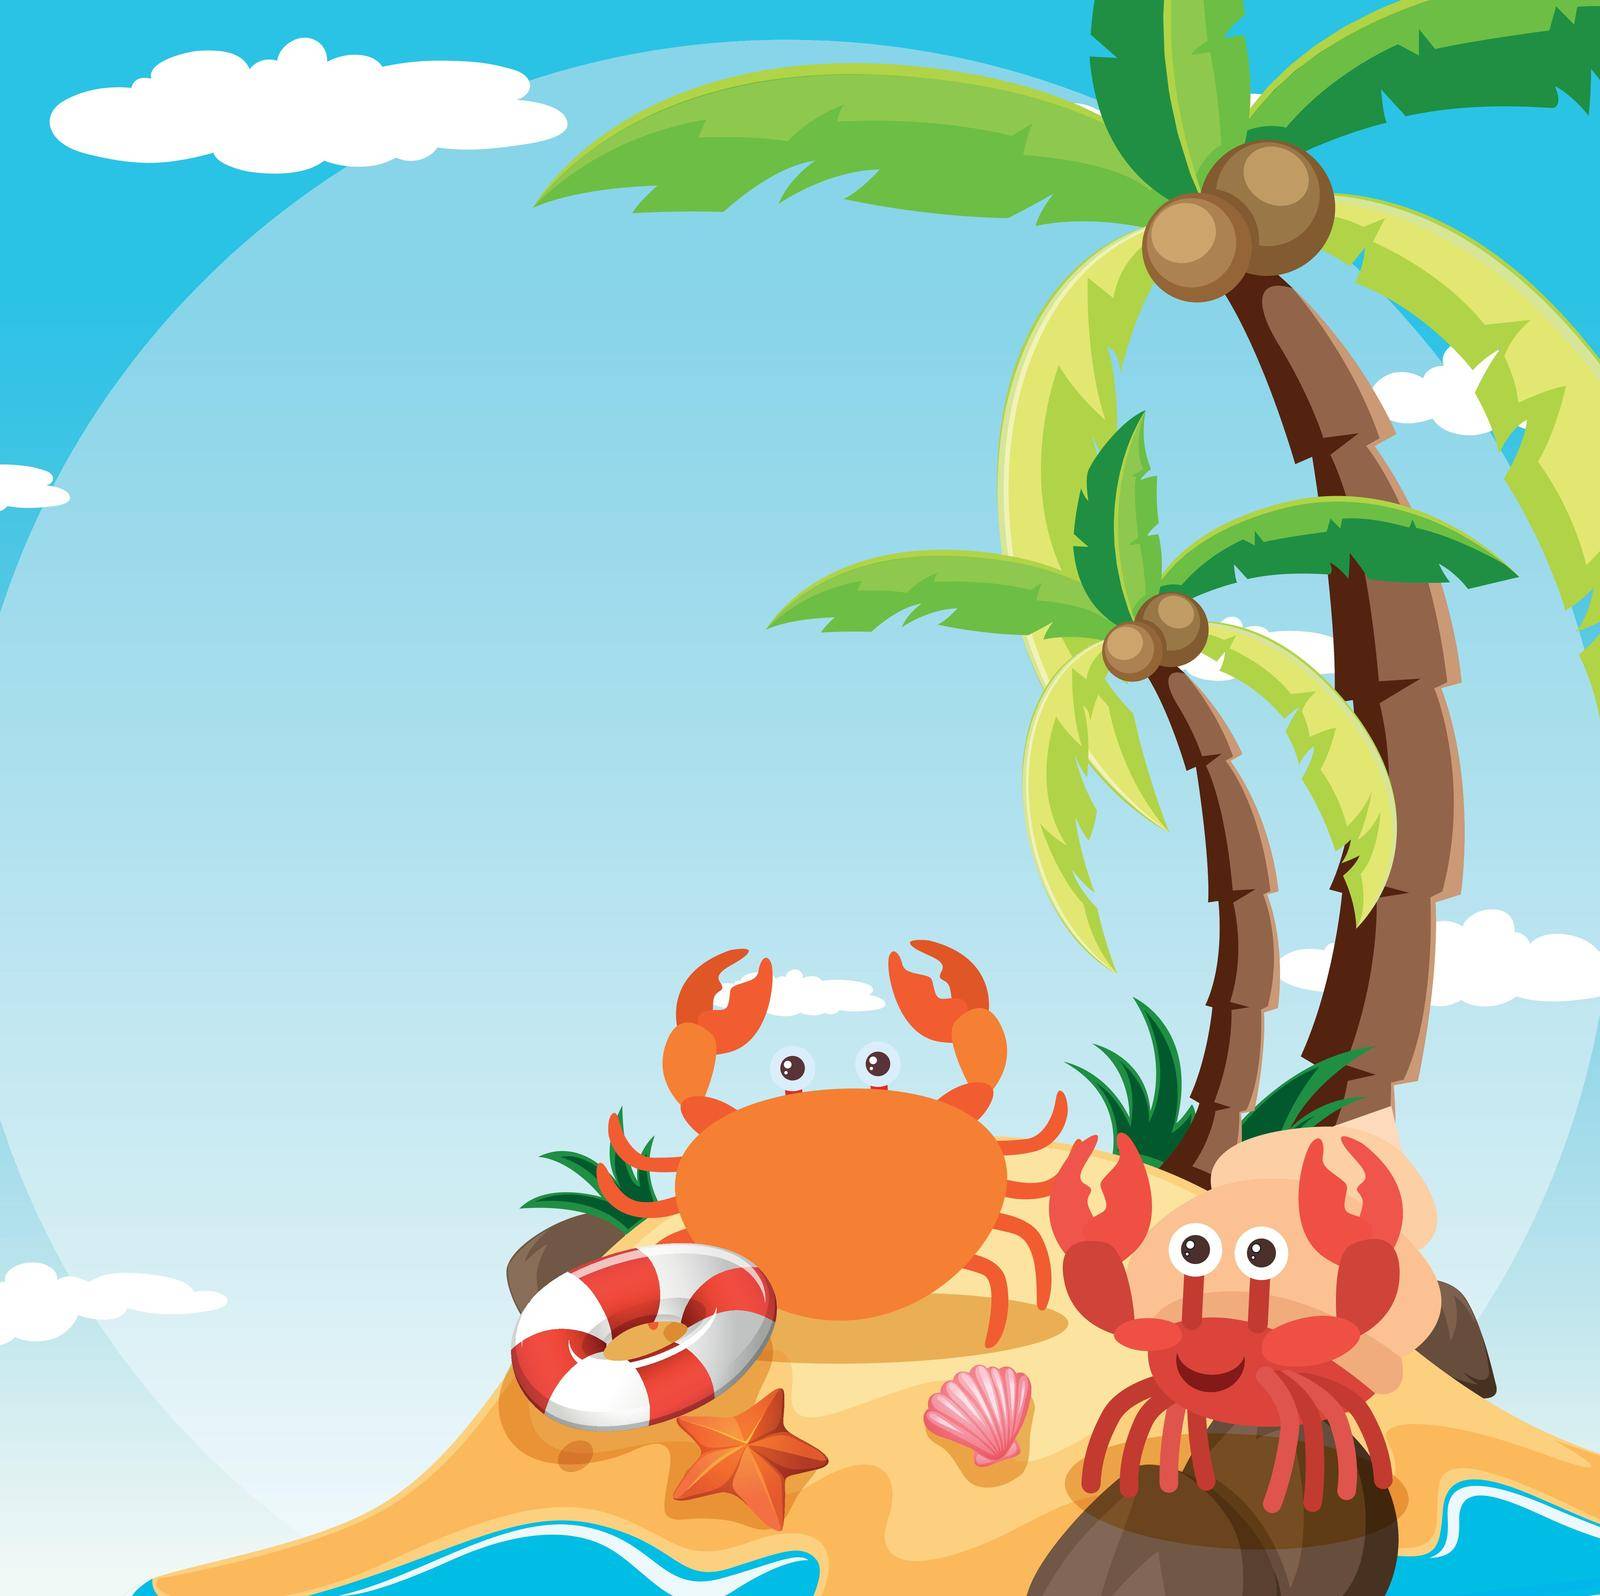 Scene with crab and hermit crab on island illustration